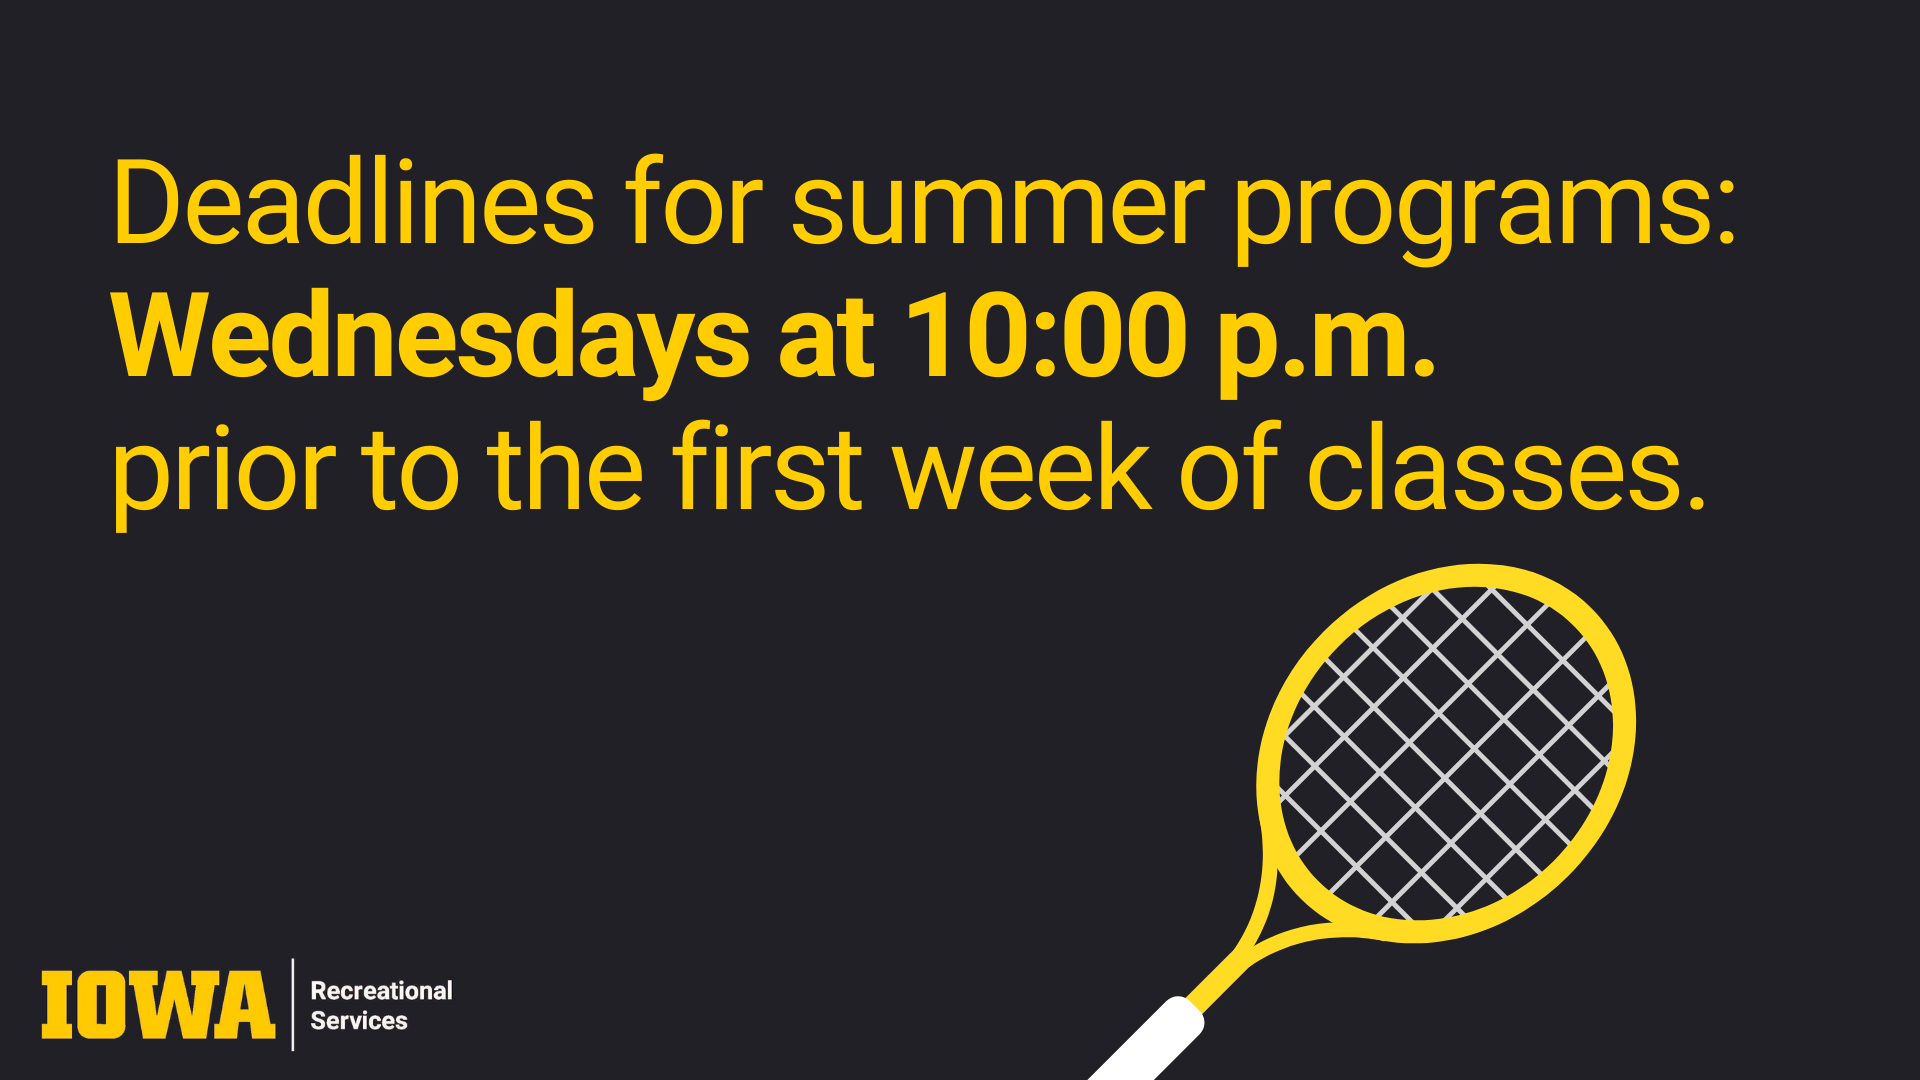 Deadlines for Summer programs: Wednesdays at 10:00 p.m. prior to the first week of classes.